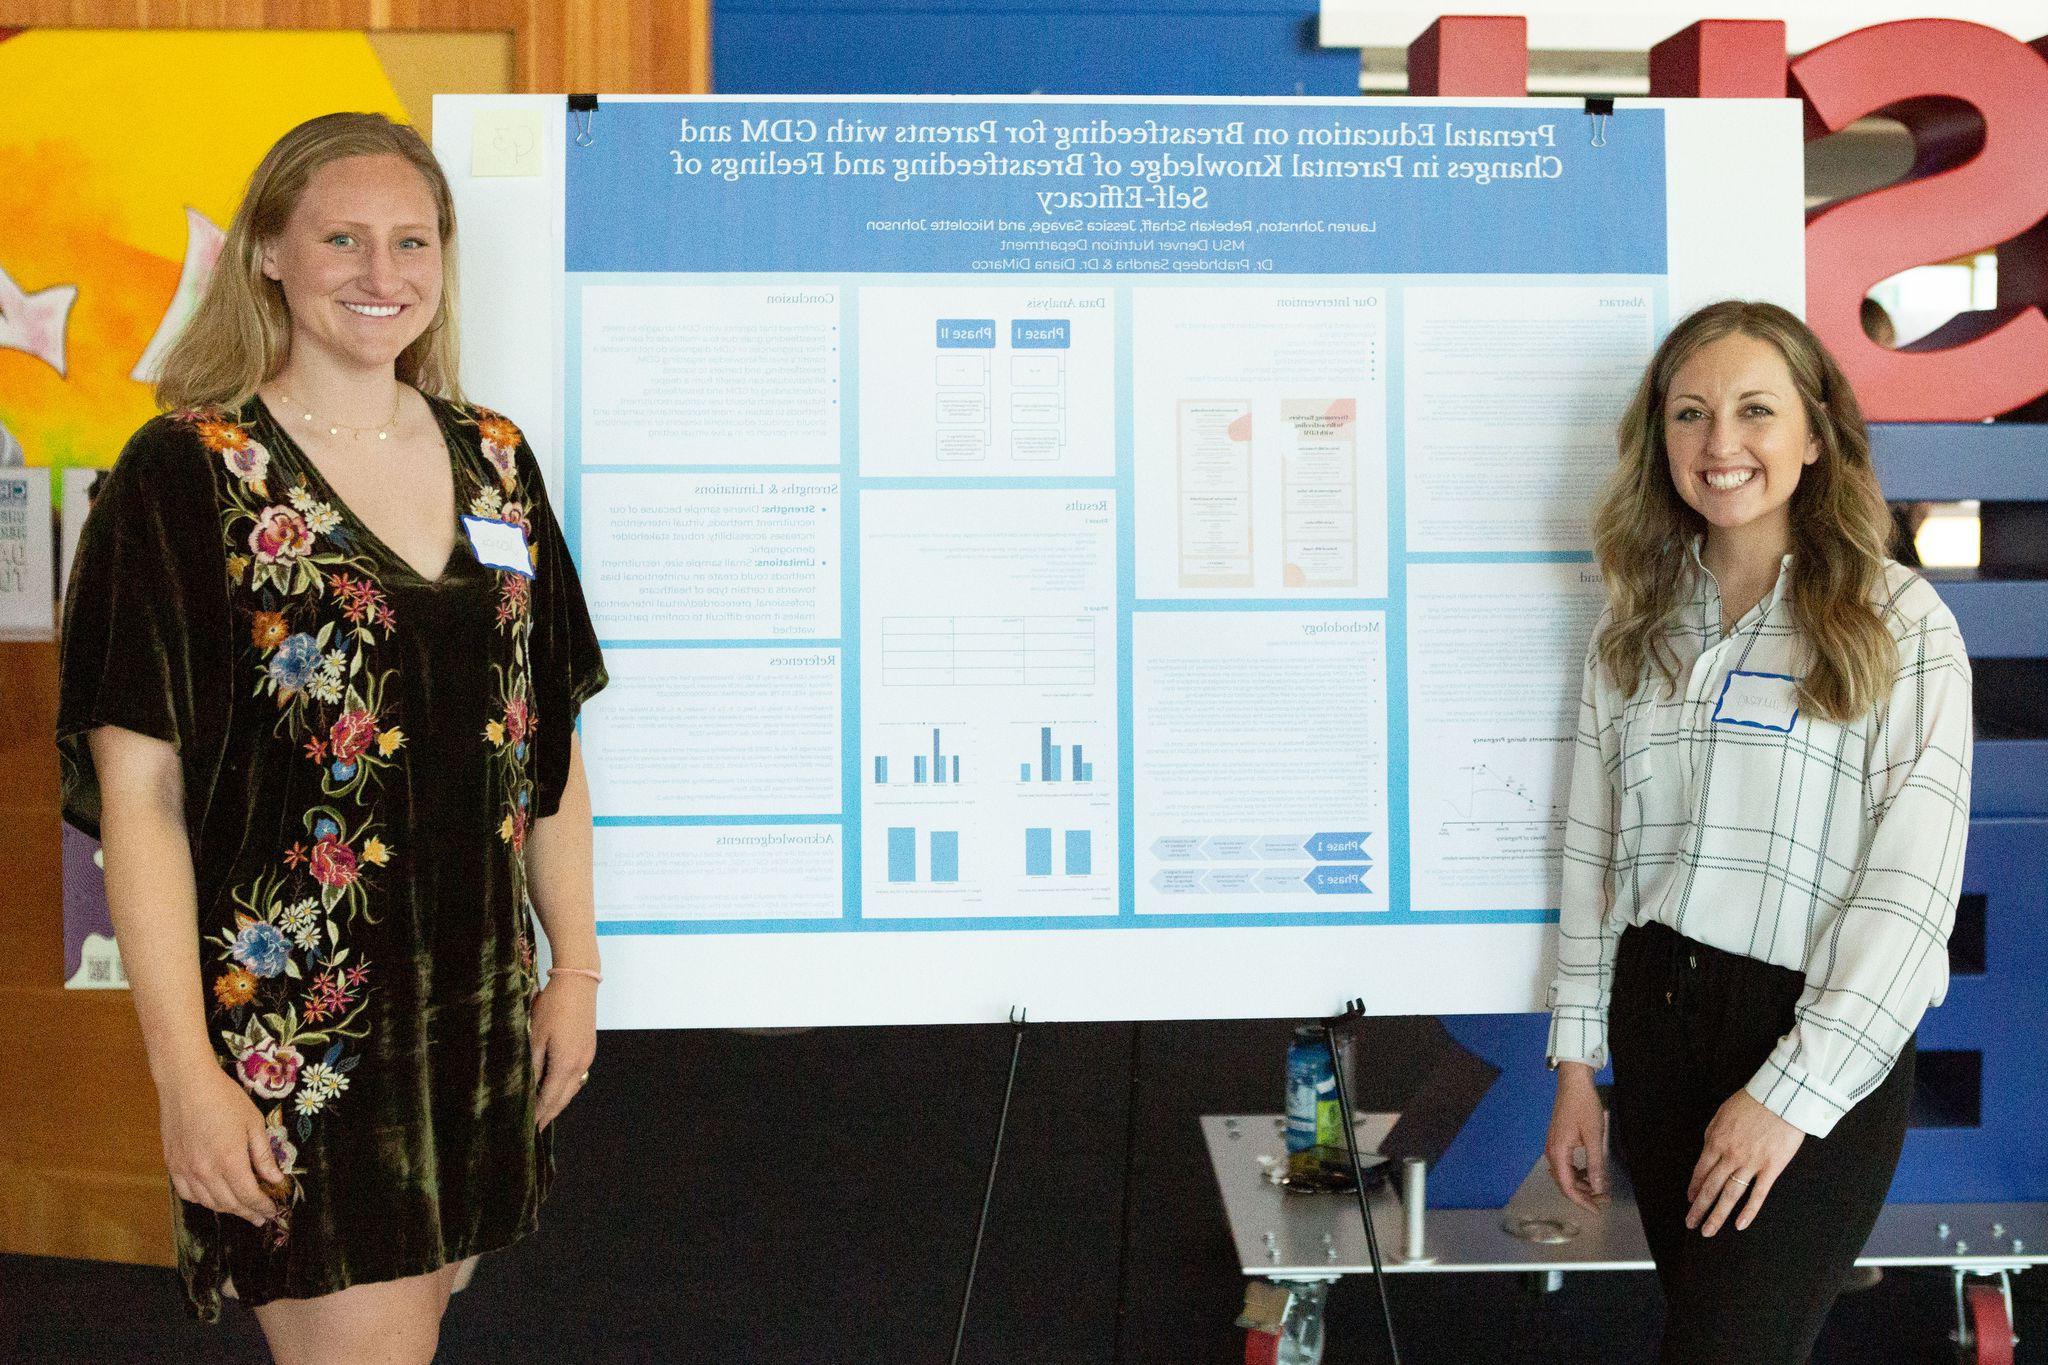 Students presenting at a conference